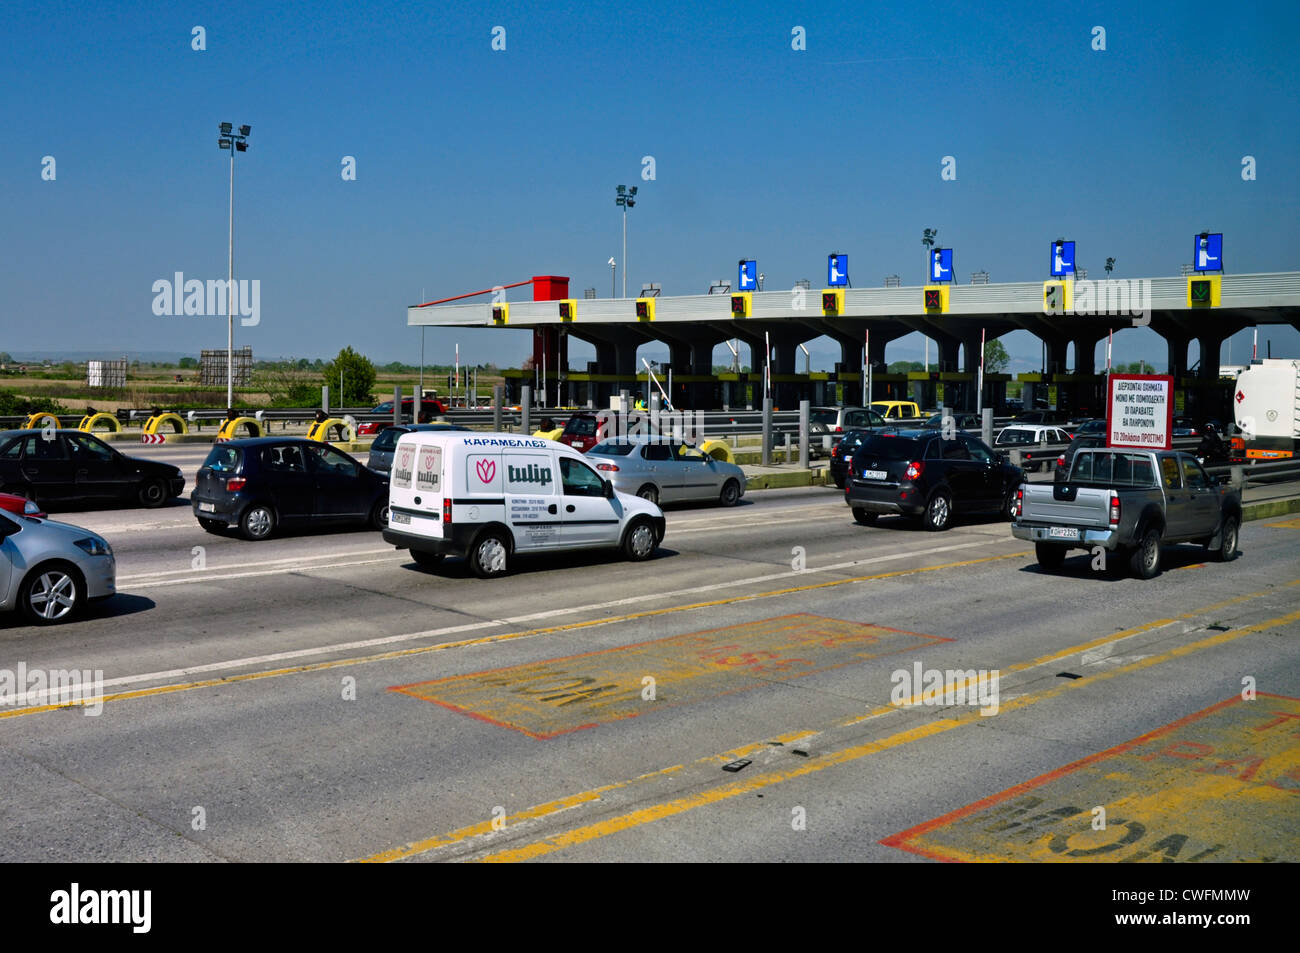 EUROPE, Greece, Thessaloniki, traffic at toll booth on toll road Stock  Photo - Alamy